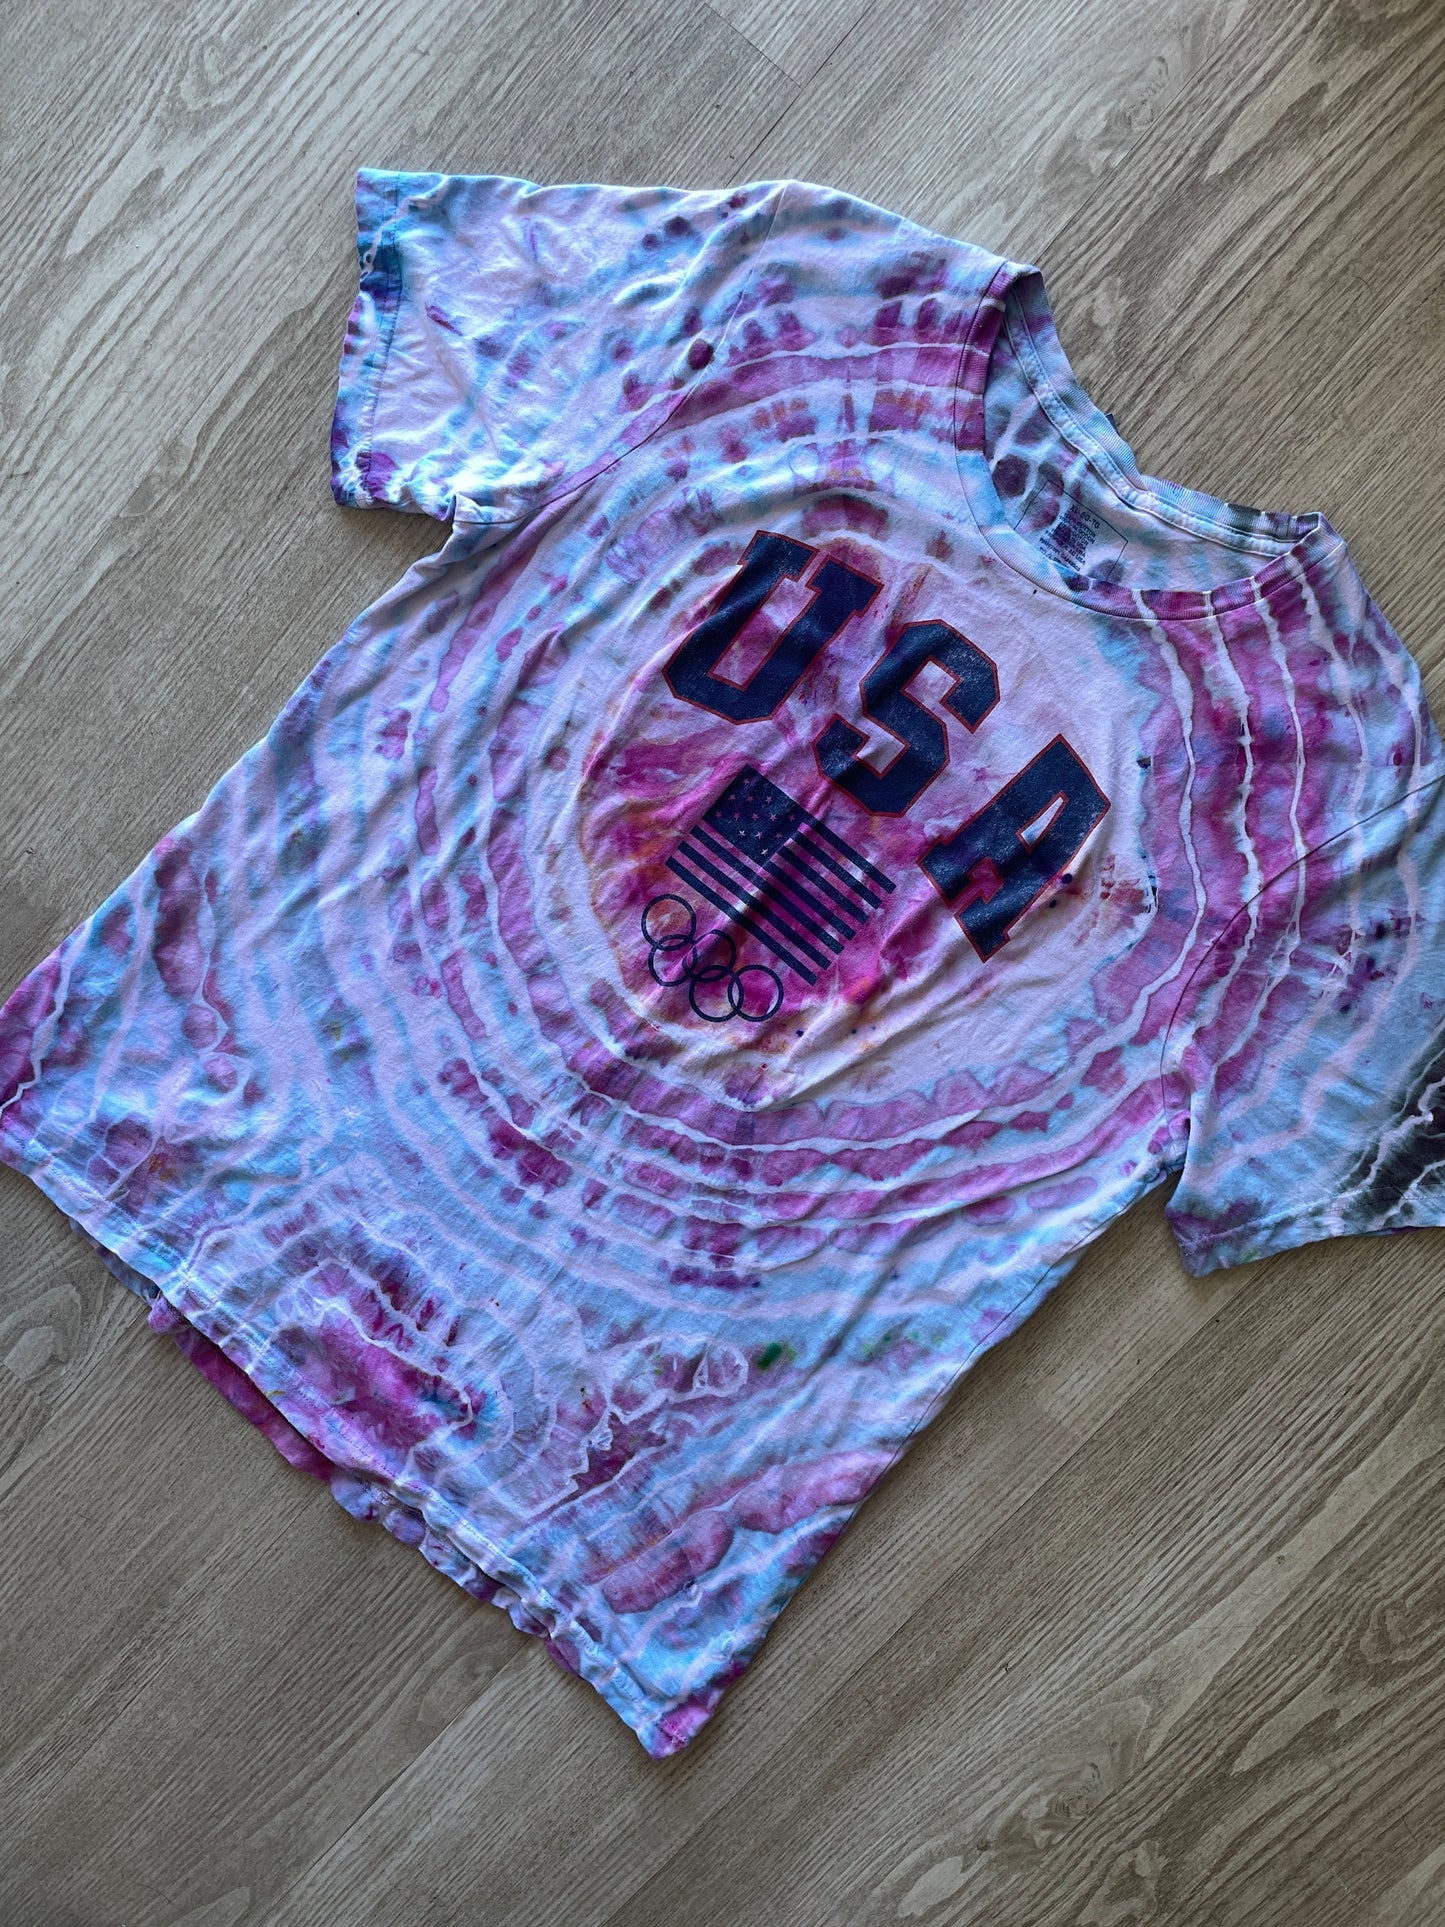 XL Men’s Team USA Handmade Tie Dye Short Sleeve T-Shirt | One-Of-a-Kind Upcycled Pink and Purple Galaxy Ice Dye Geode Top